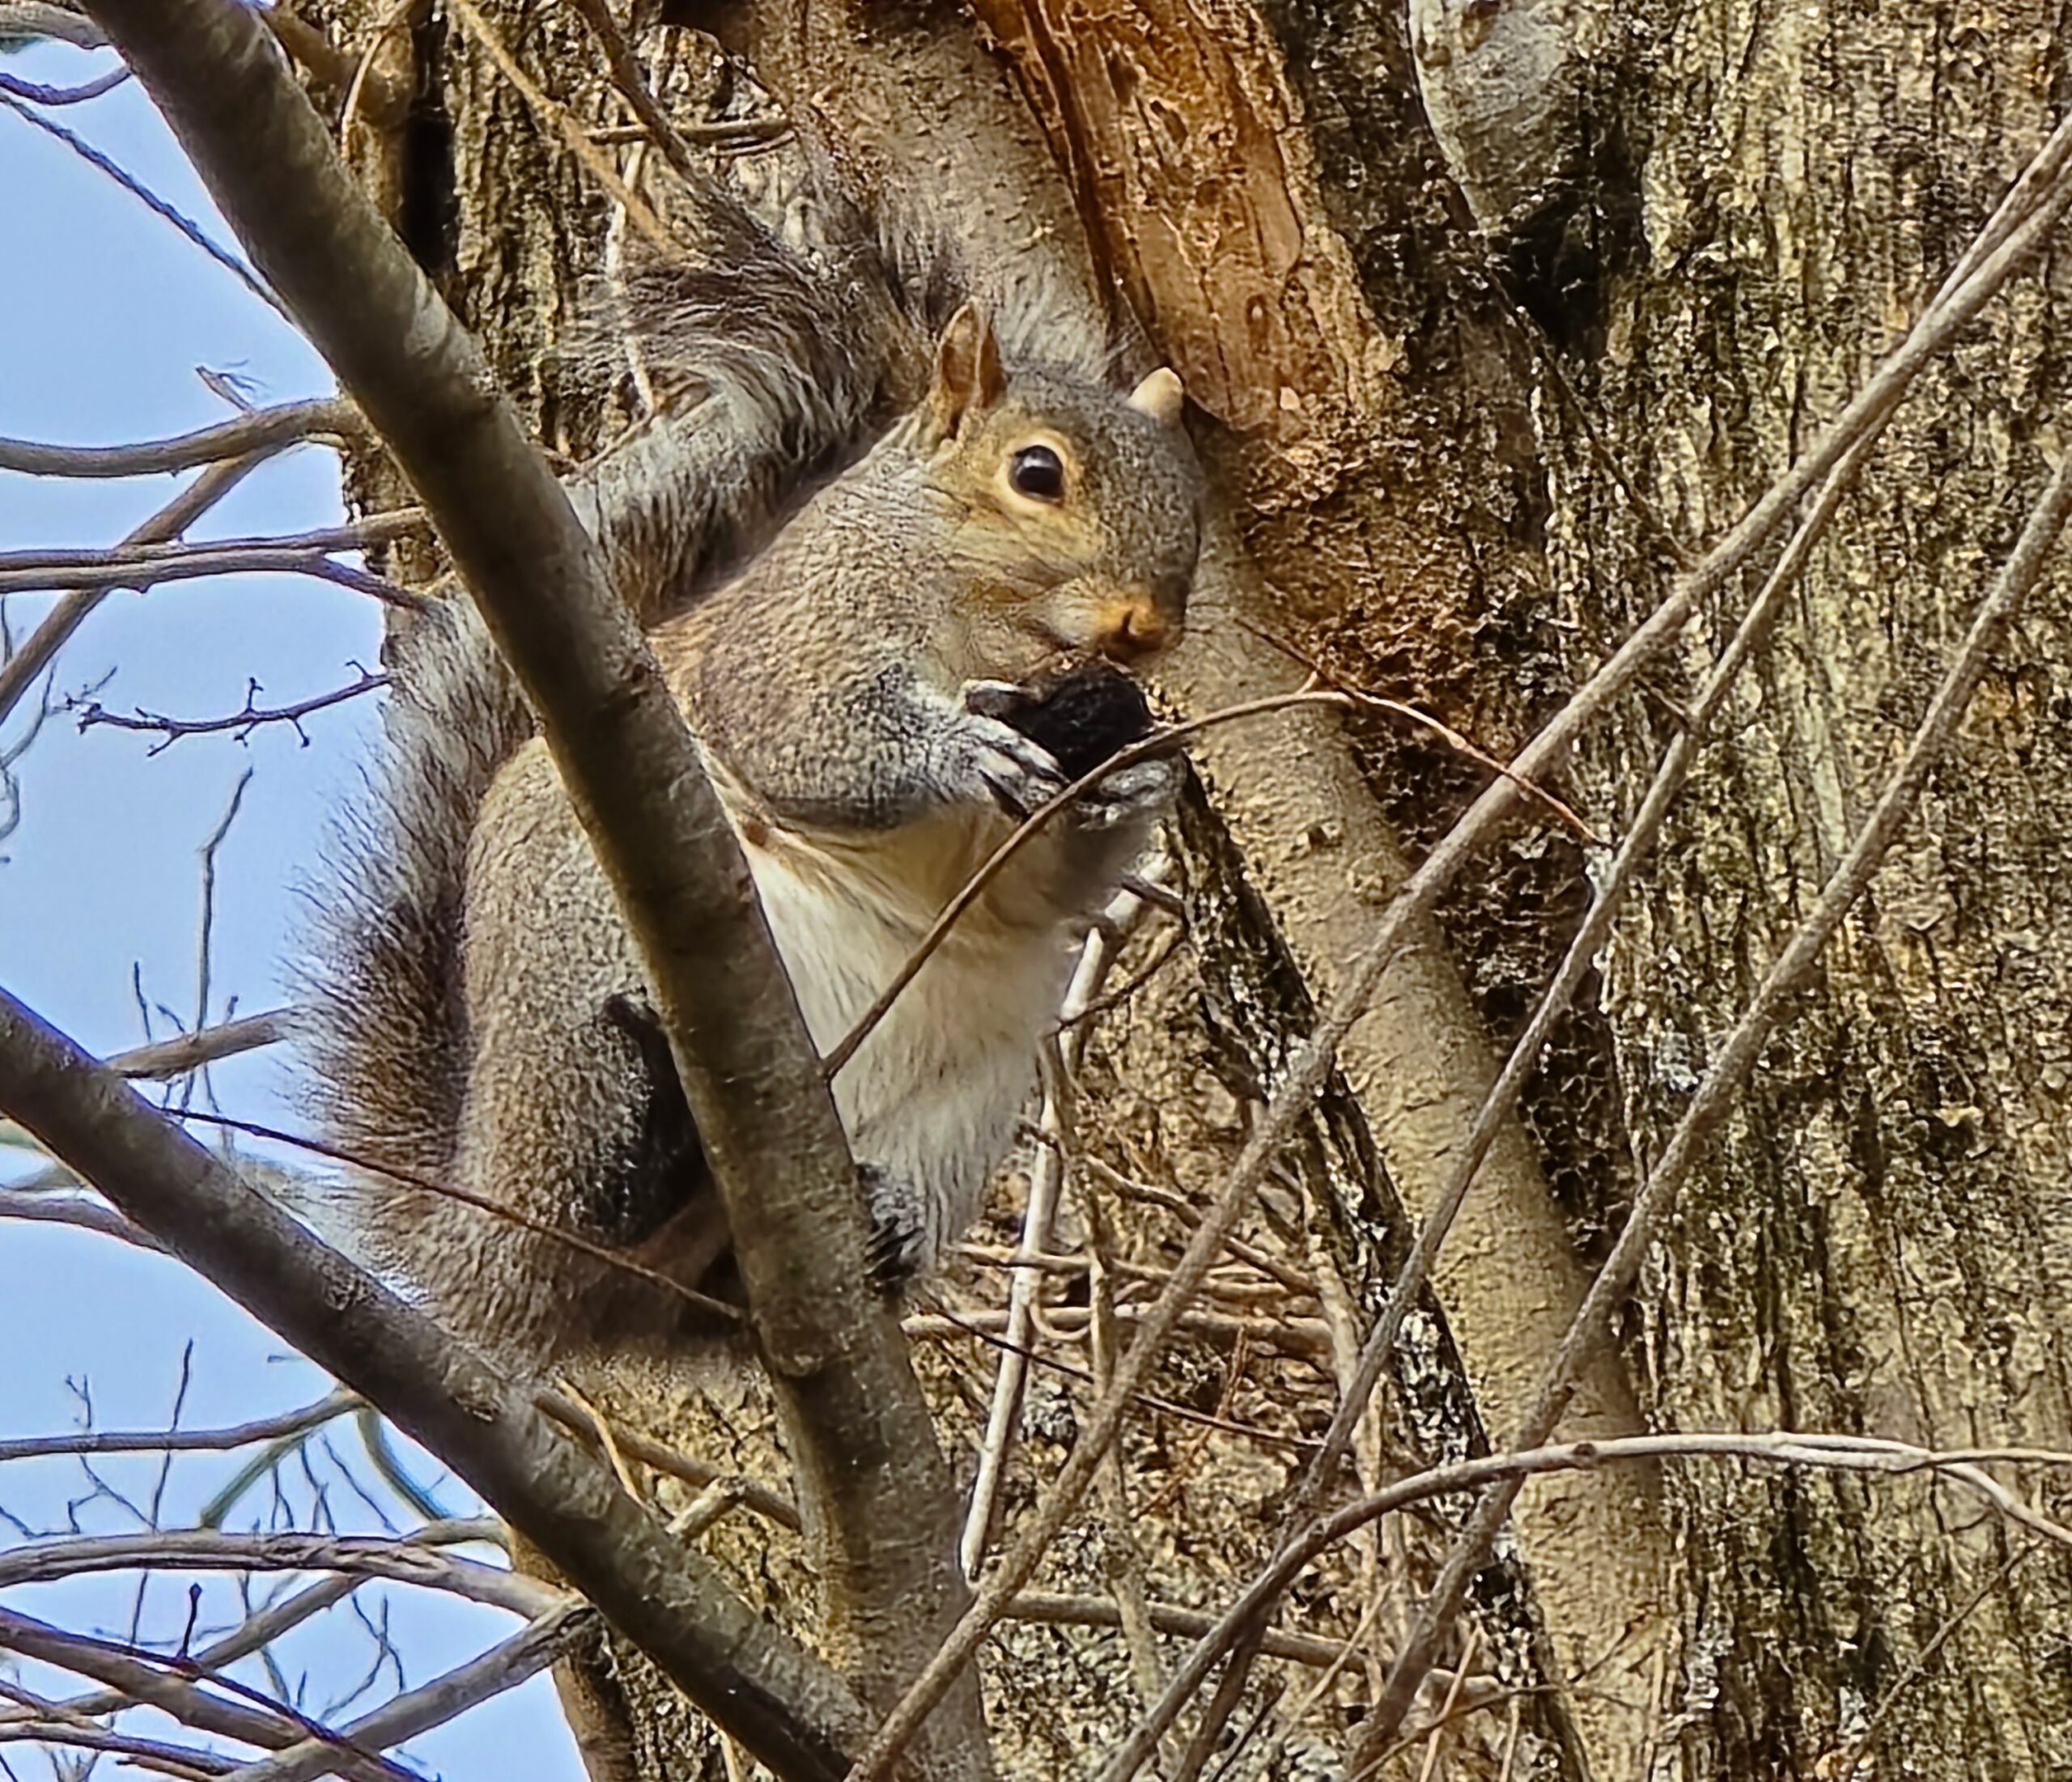 Squirrel eating a walnut high up in a tree